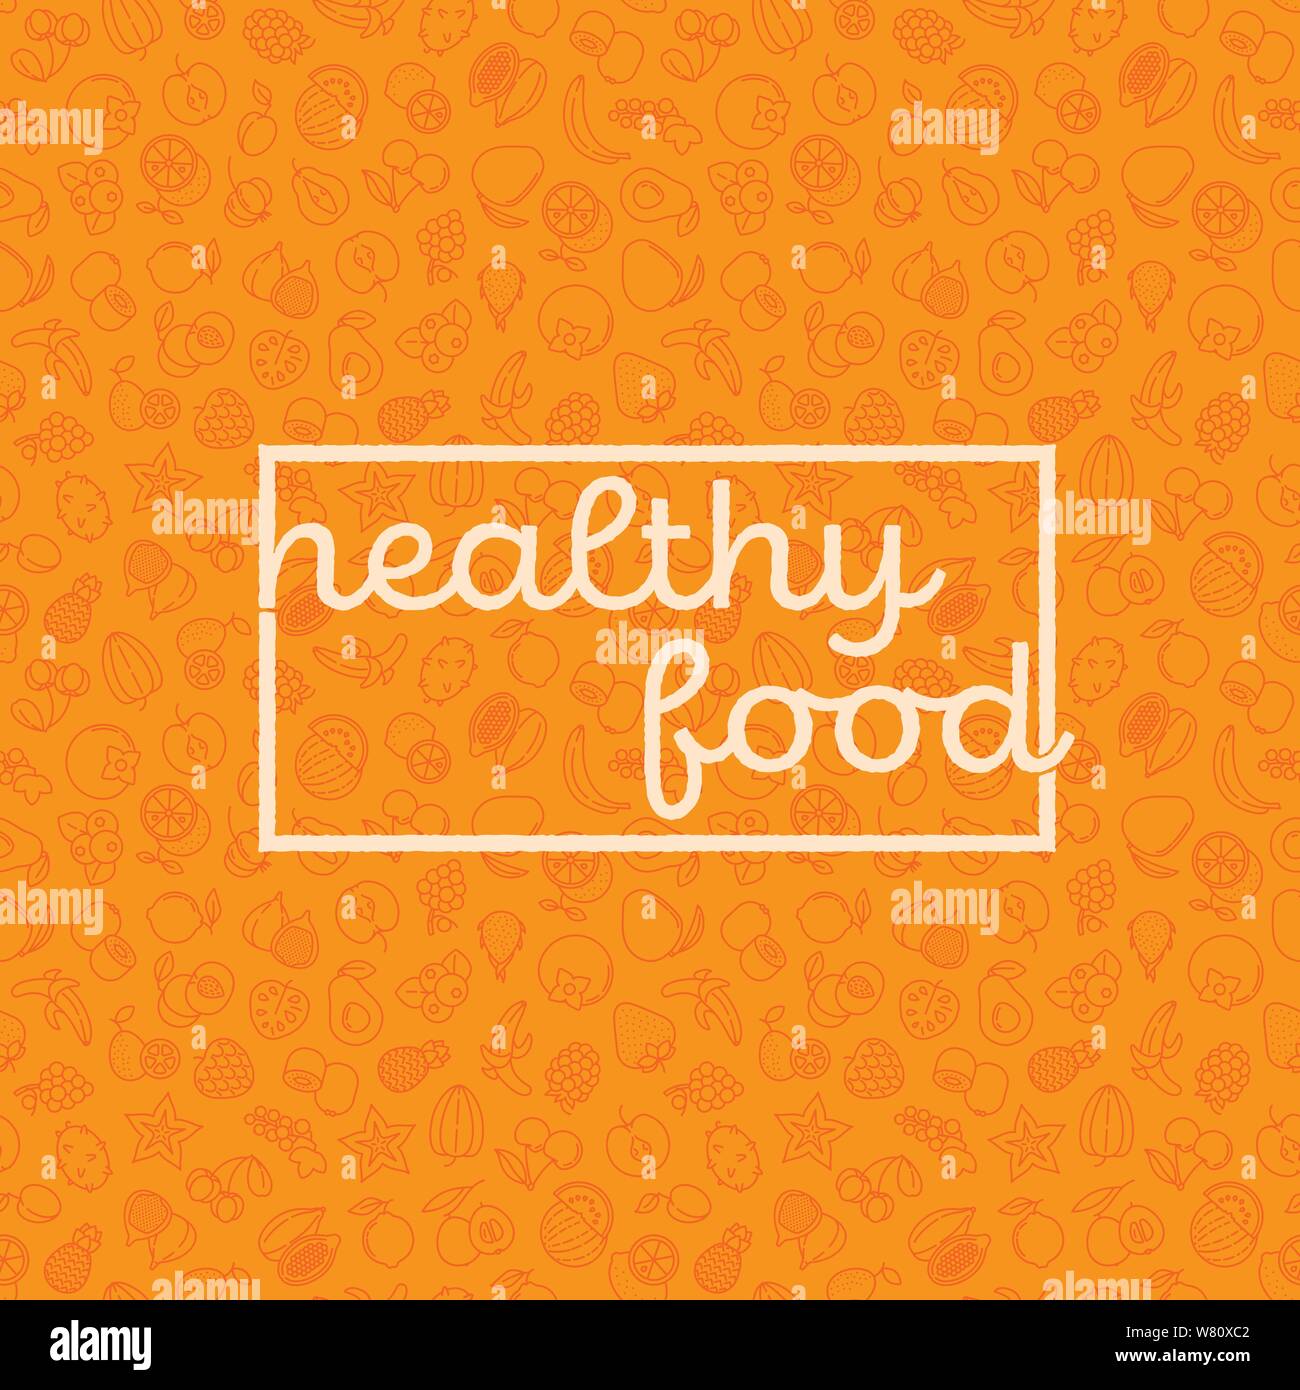 Healthy Eating Poster Stock Photos Healthy Eating Poster Stock